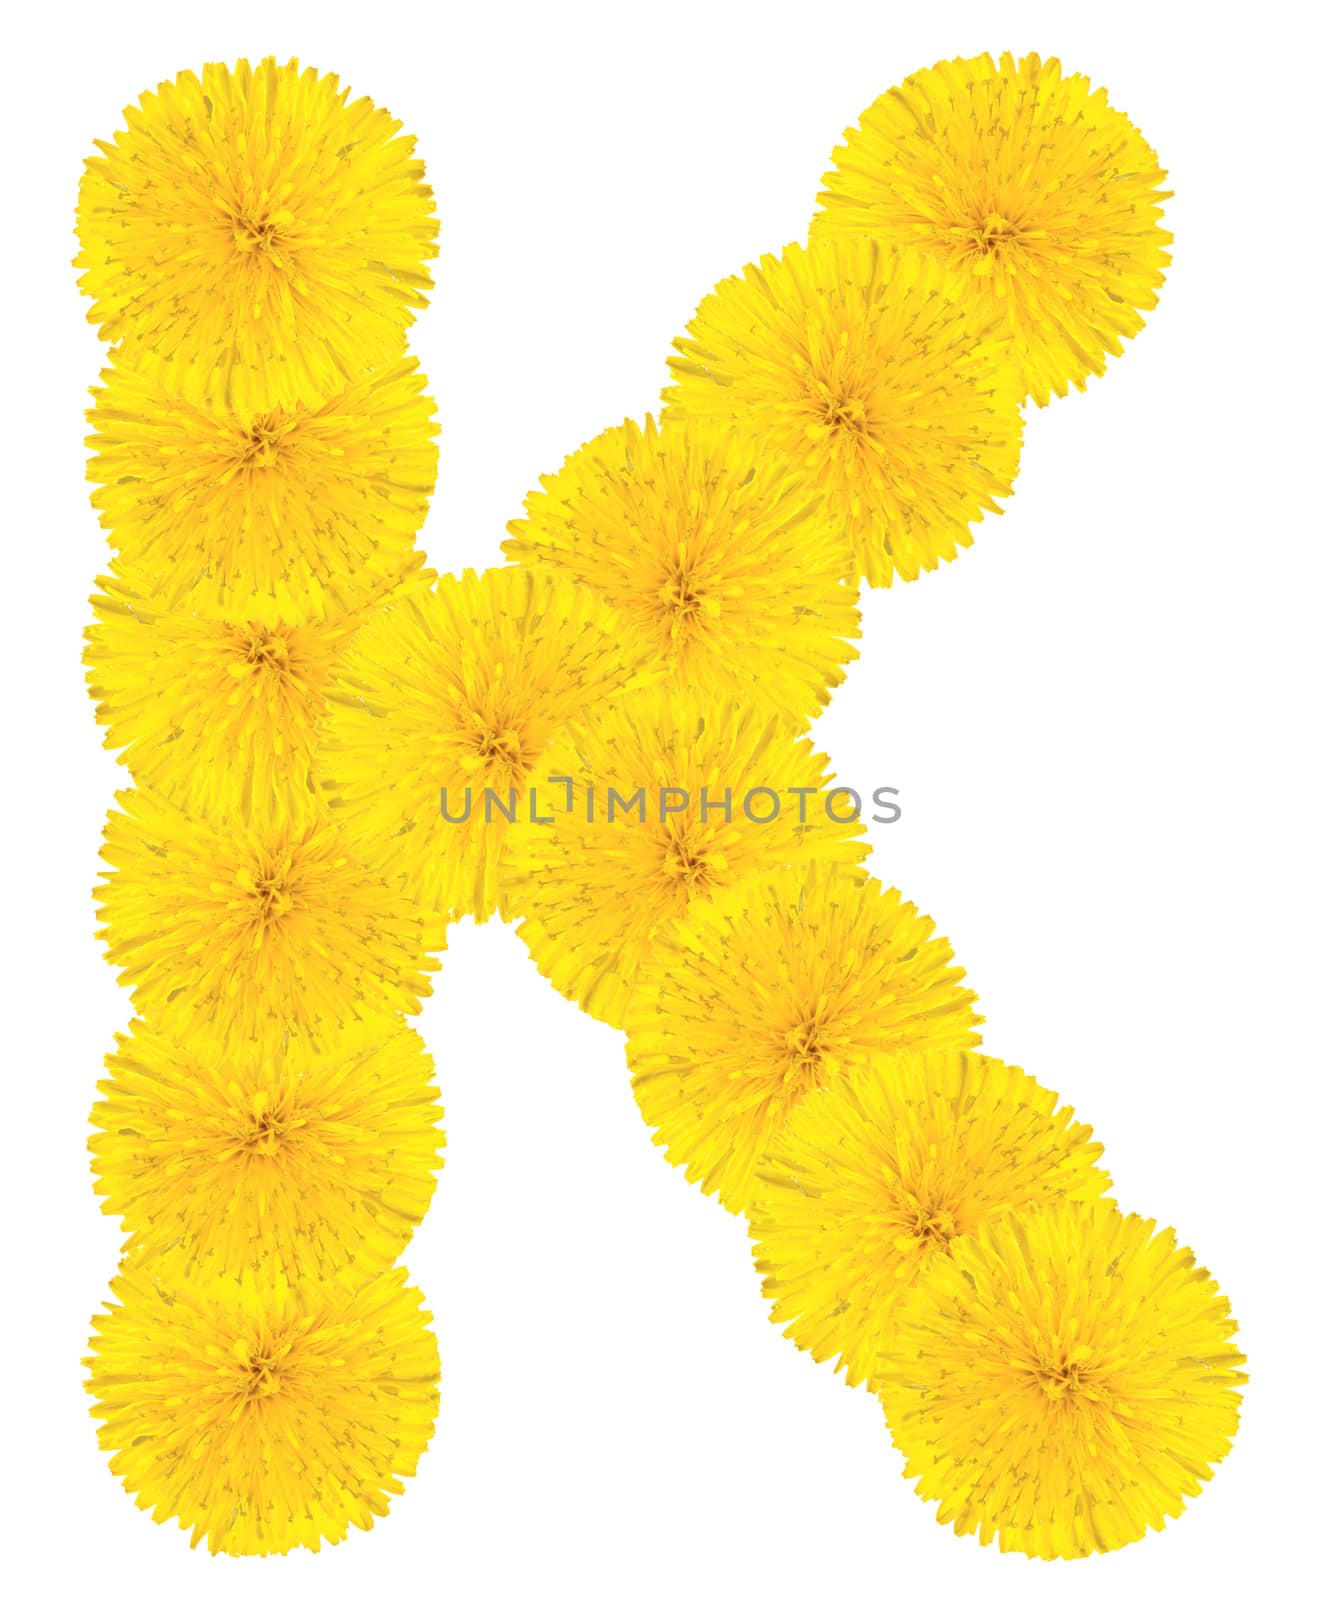 Letter K made from dandelions by Valengilda